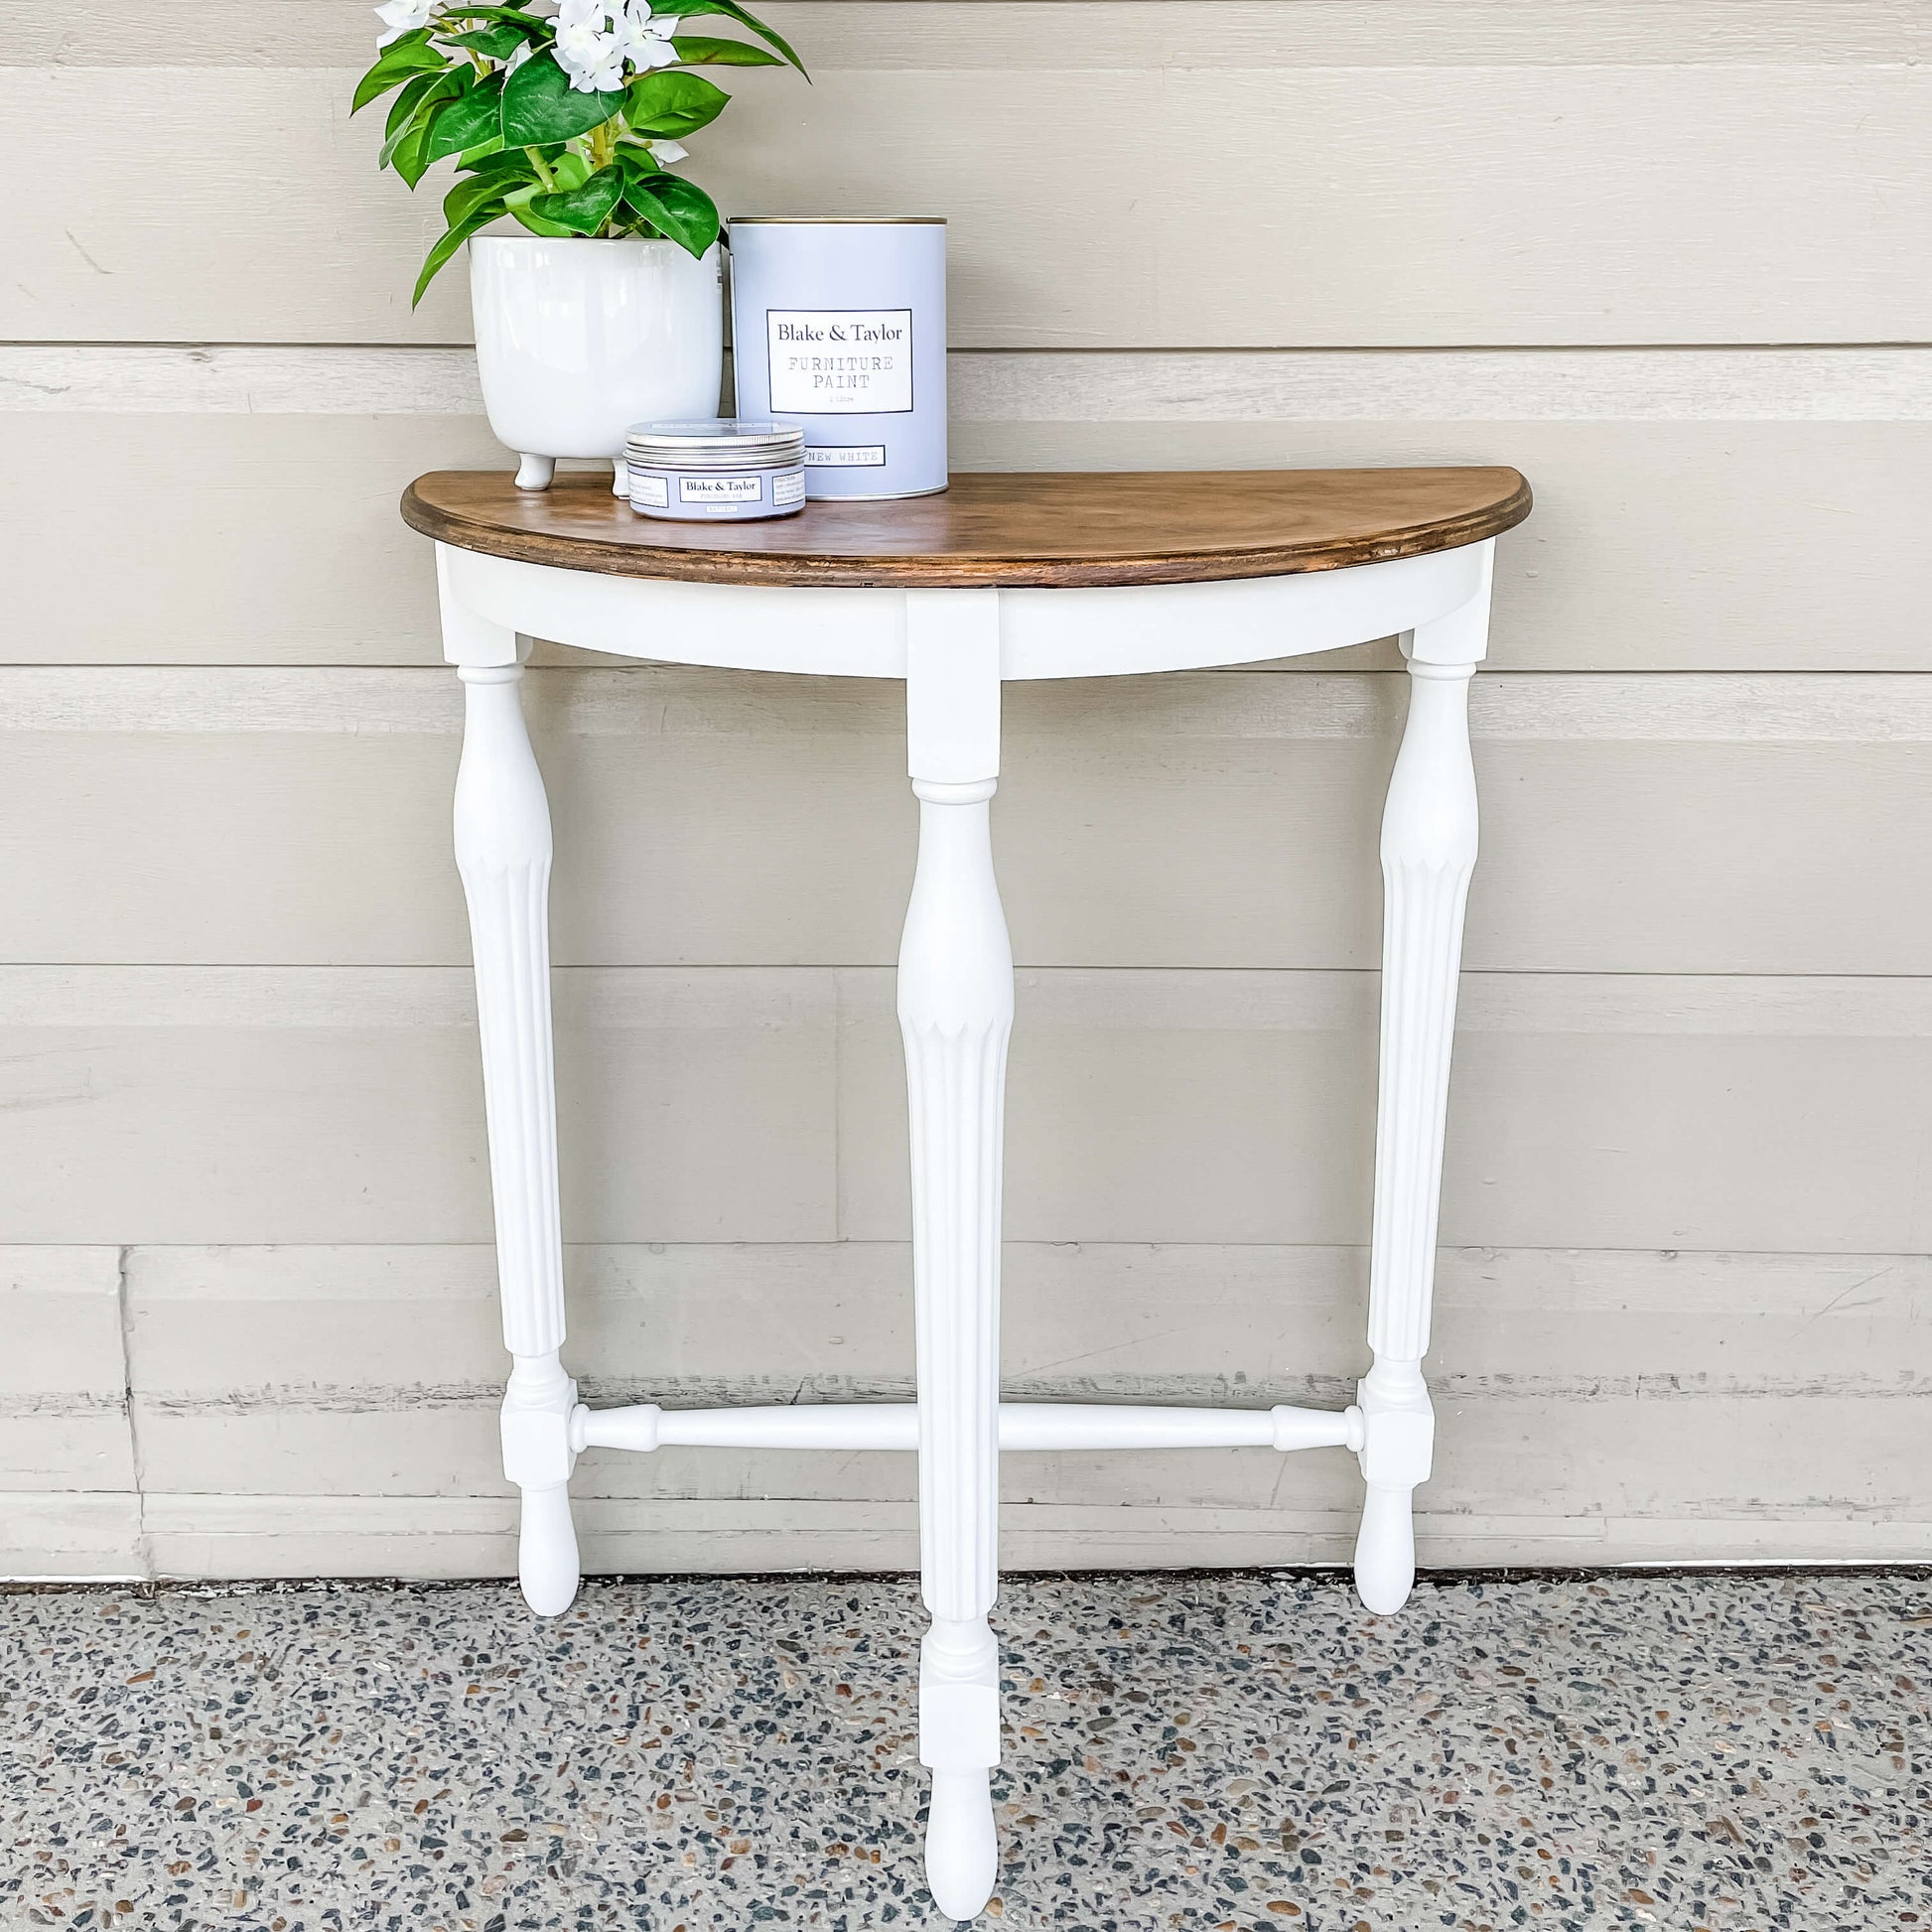 Vintage half moon table painted with Blake & Taylor New White Chalk Furniture Paint